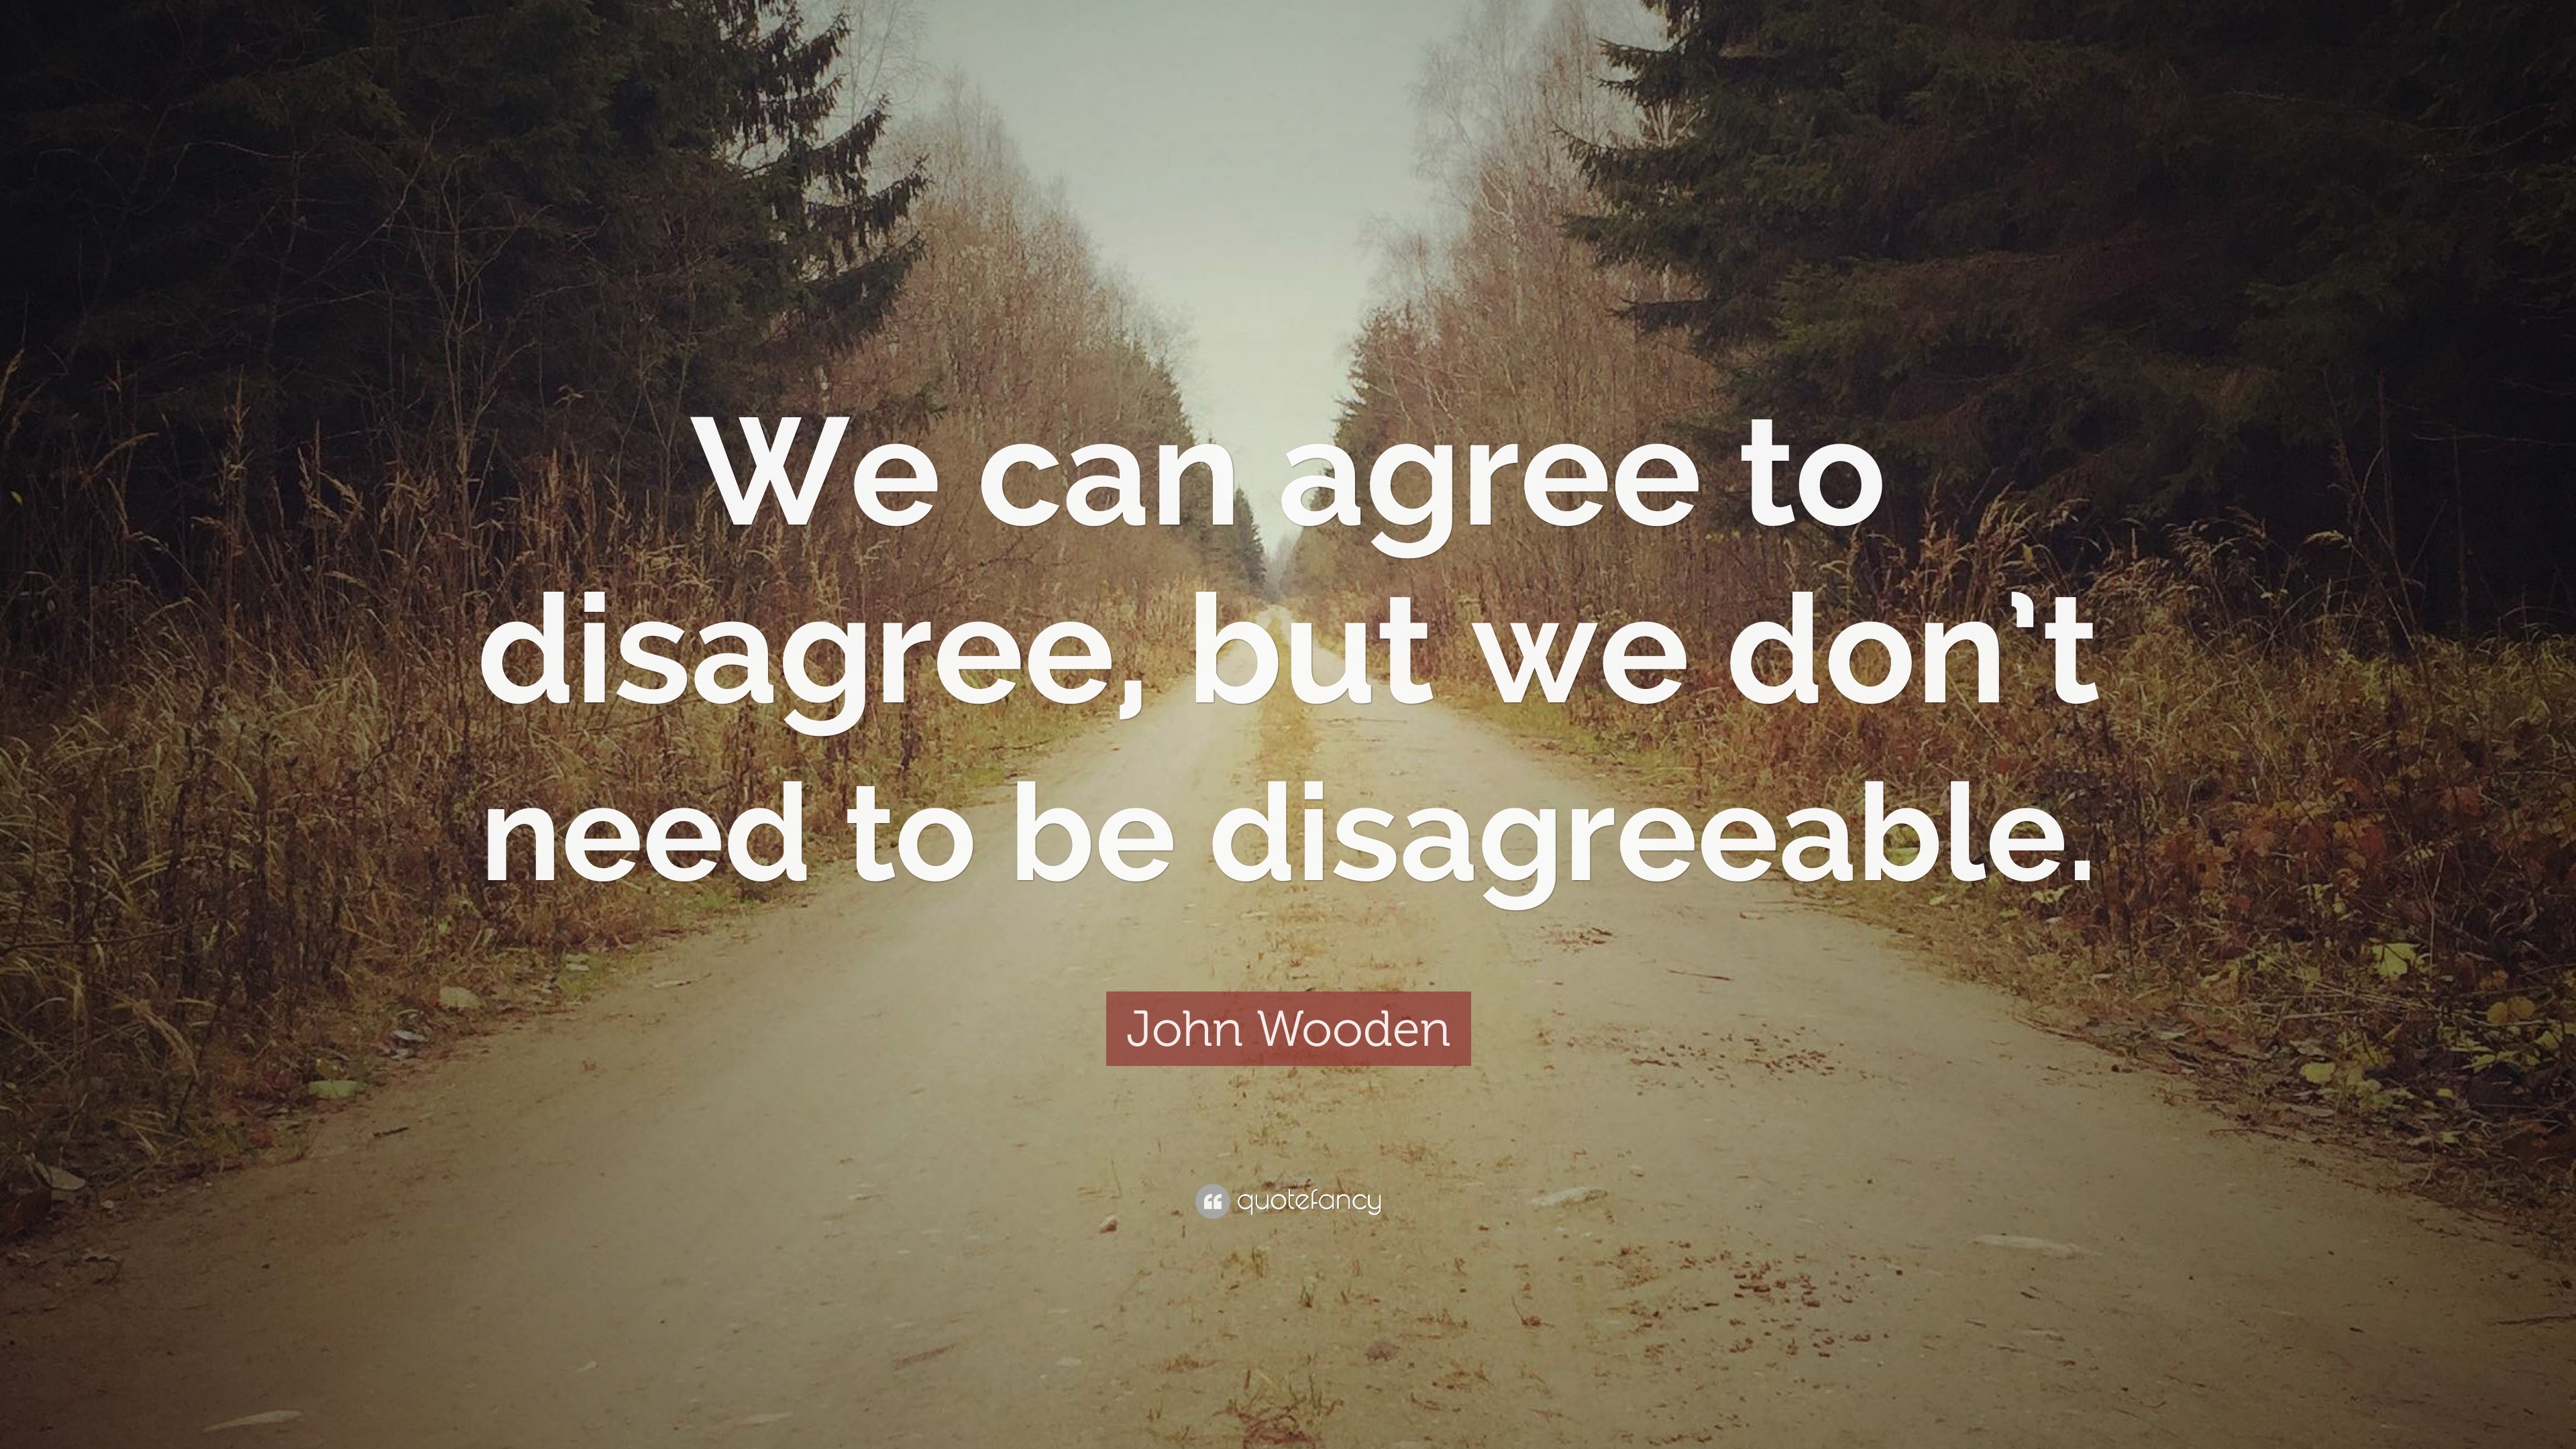 John Wooden Quote “We can agree to disagree, but we don’t need to be